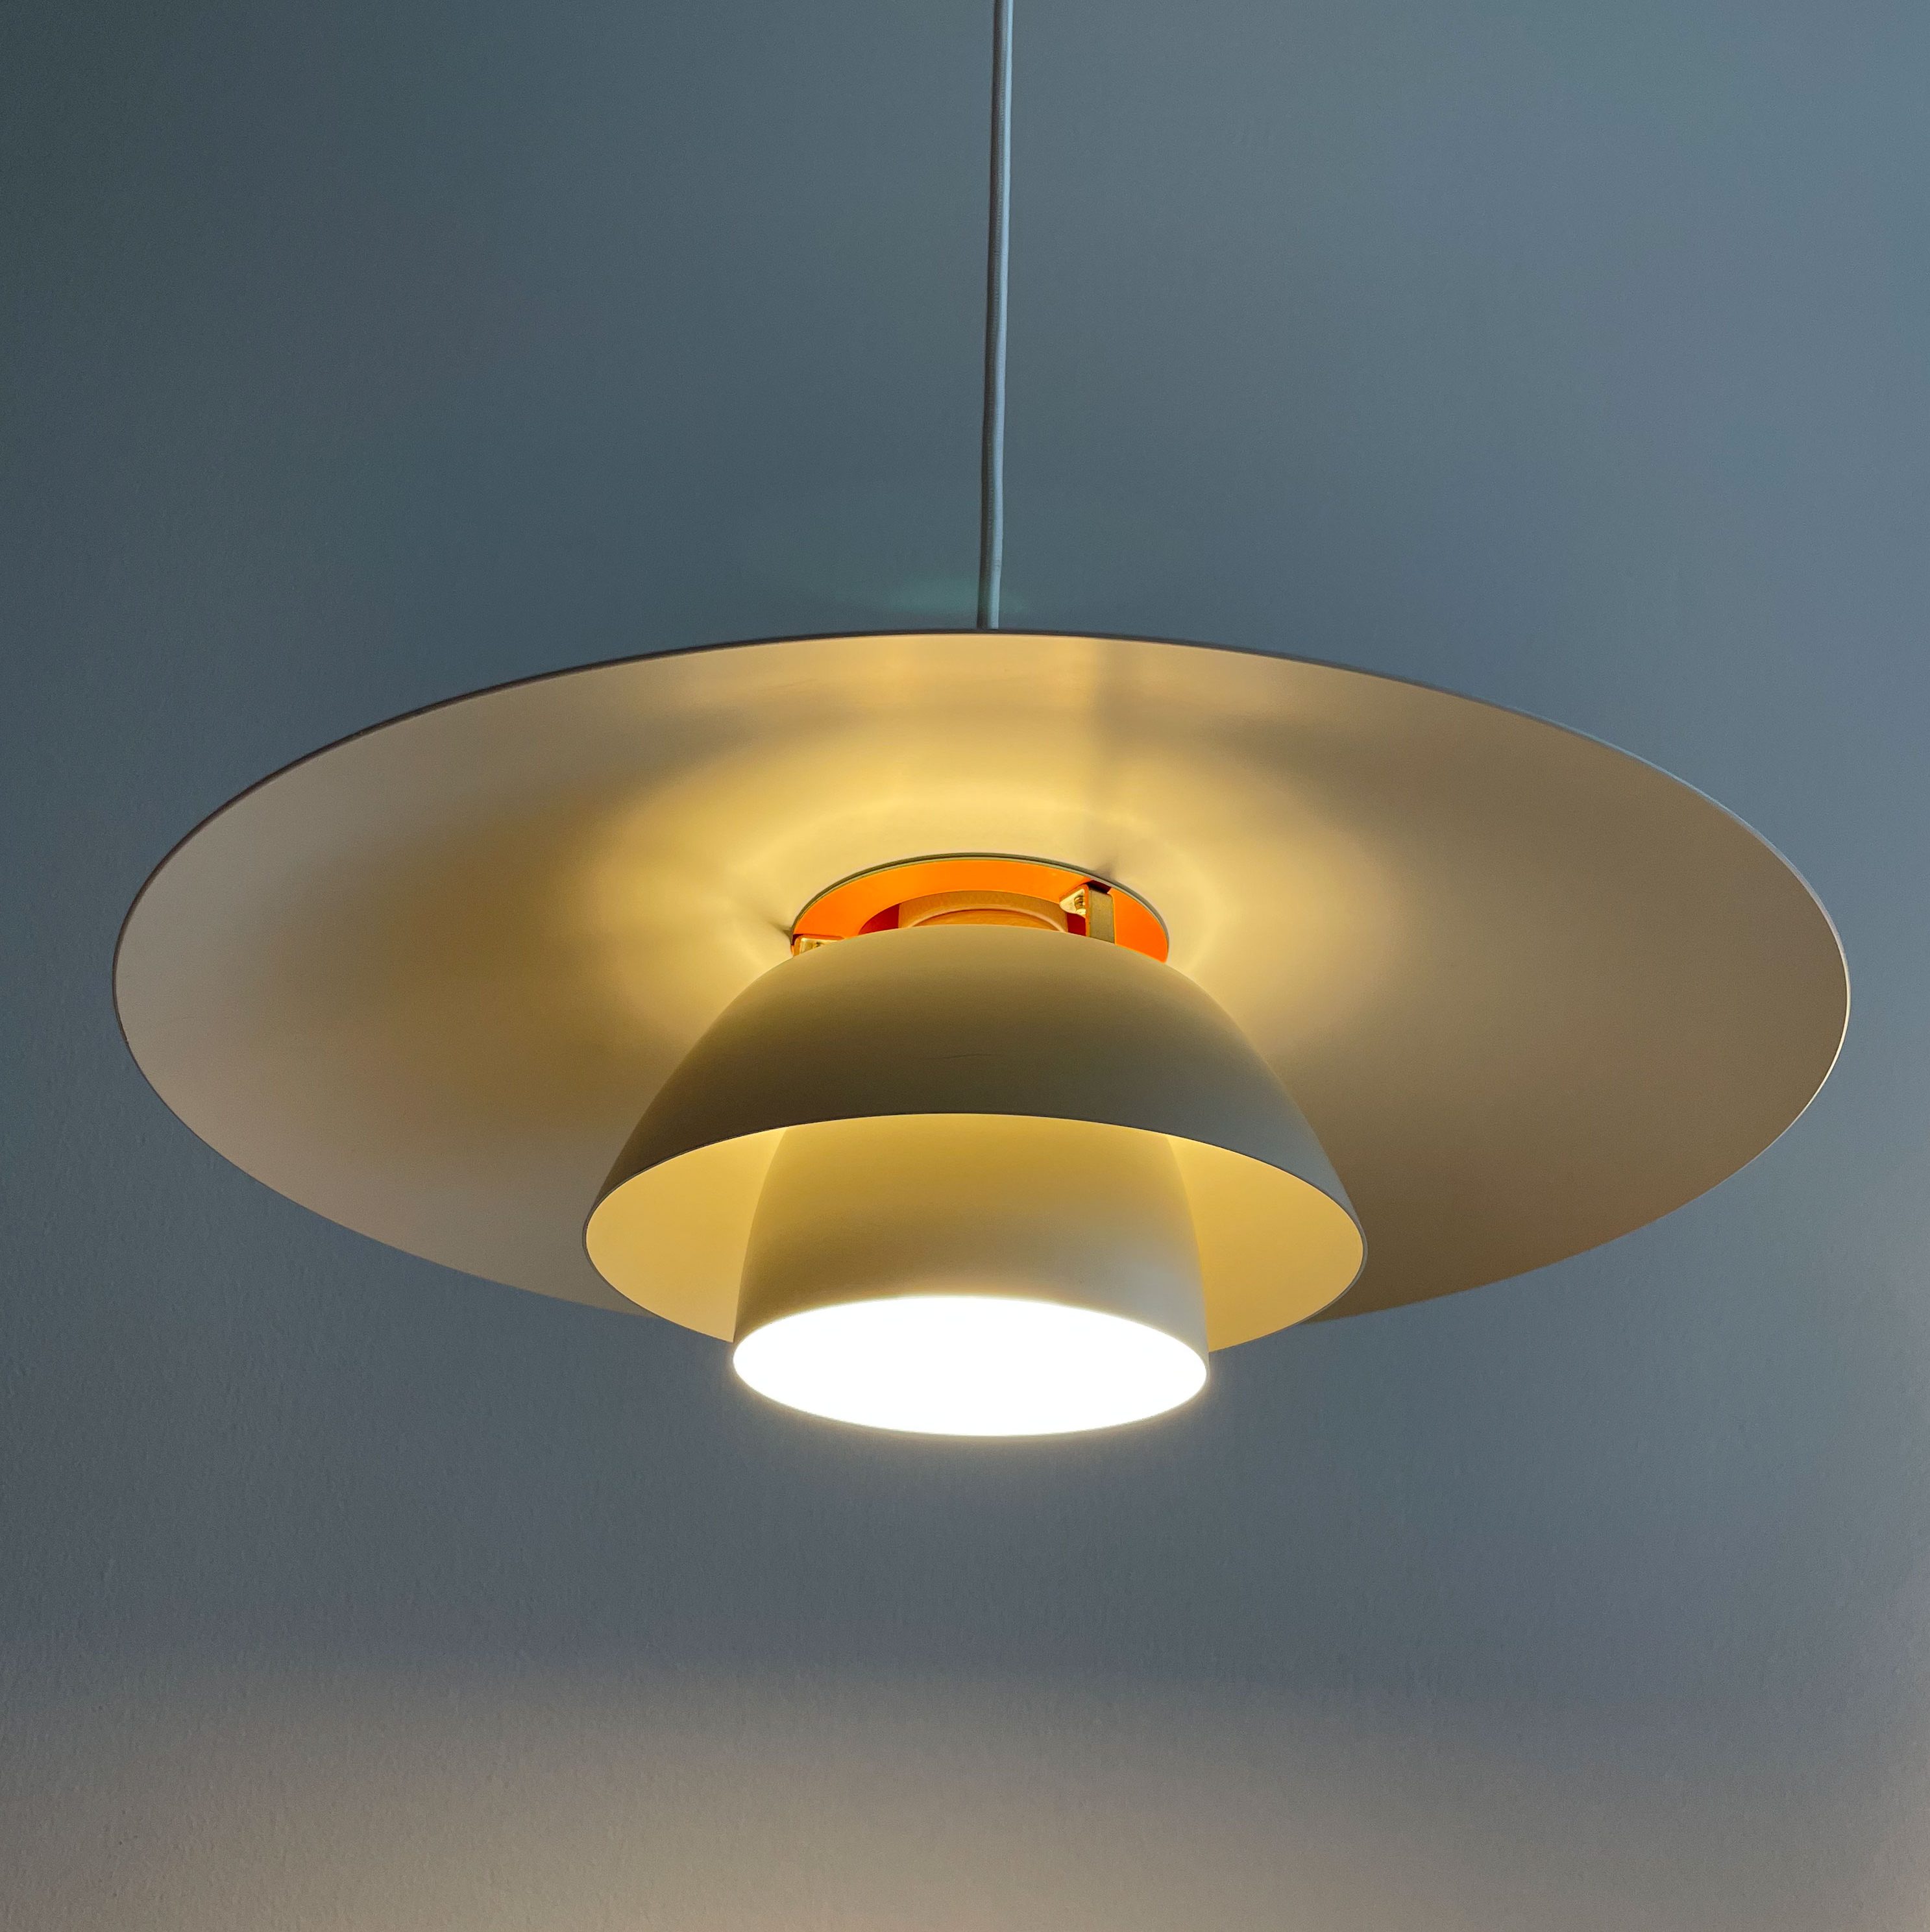 PH 4/3 Pendant Lamp by Poul Henningsen for Louis Poulsen. Production from Denmark, 1970s. Available at heyday möbel, Grubenstrasse 19, 8045 Zürich, Switzerland.